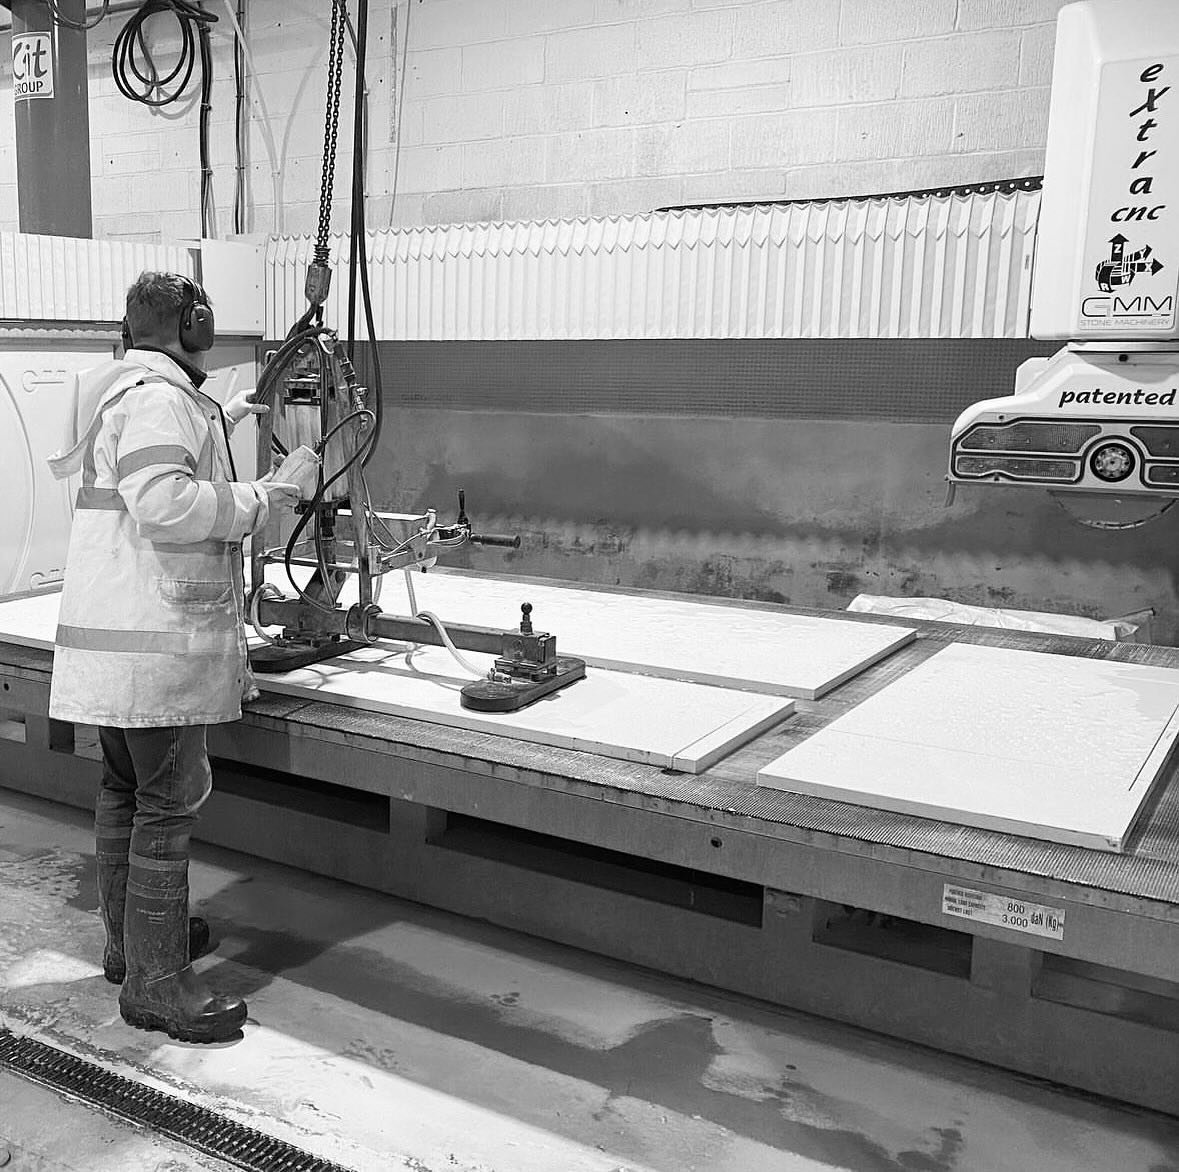 State-of-the-art technology featuring the Vacuum Lifter &amp; CNC Sawing Machine🖤

Affordable Natural Stone &amp; Quartz Surfaces
#measured #made #fitted by @lbsstone
.
.
.
#concrete #design #interiors #interiordesign #decor #kitchen #architecture #